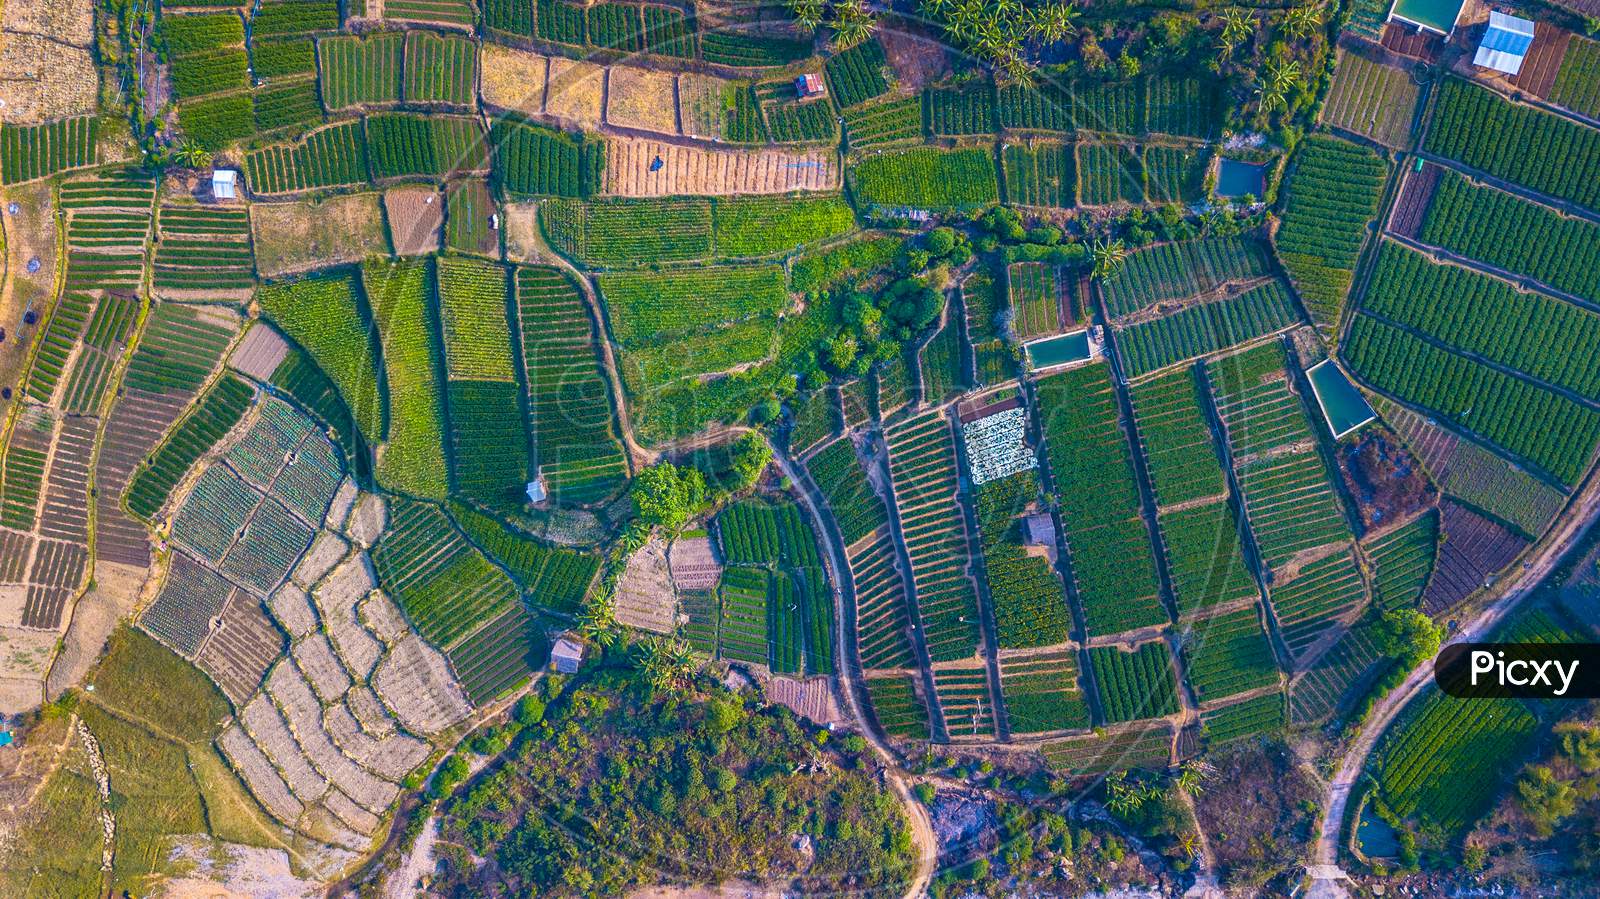 An aerial view of an agriculture field